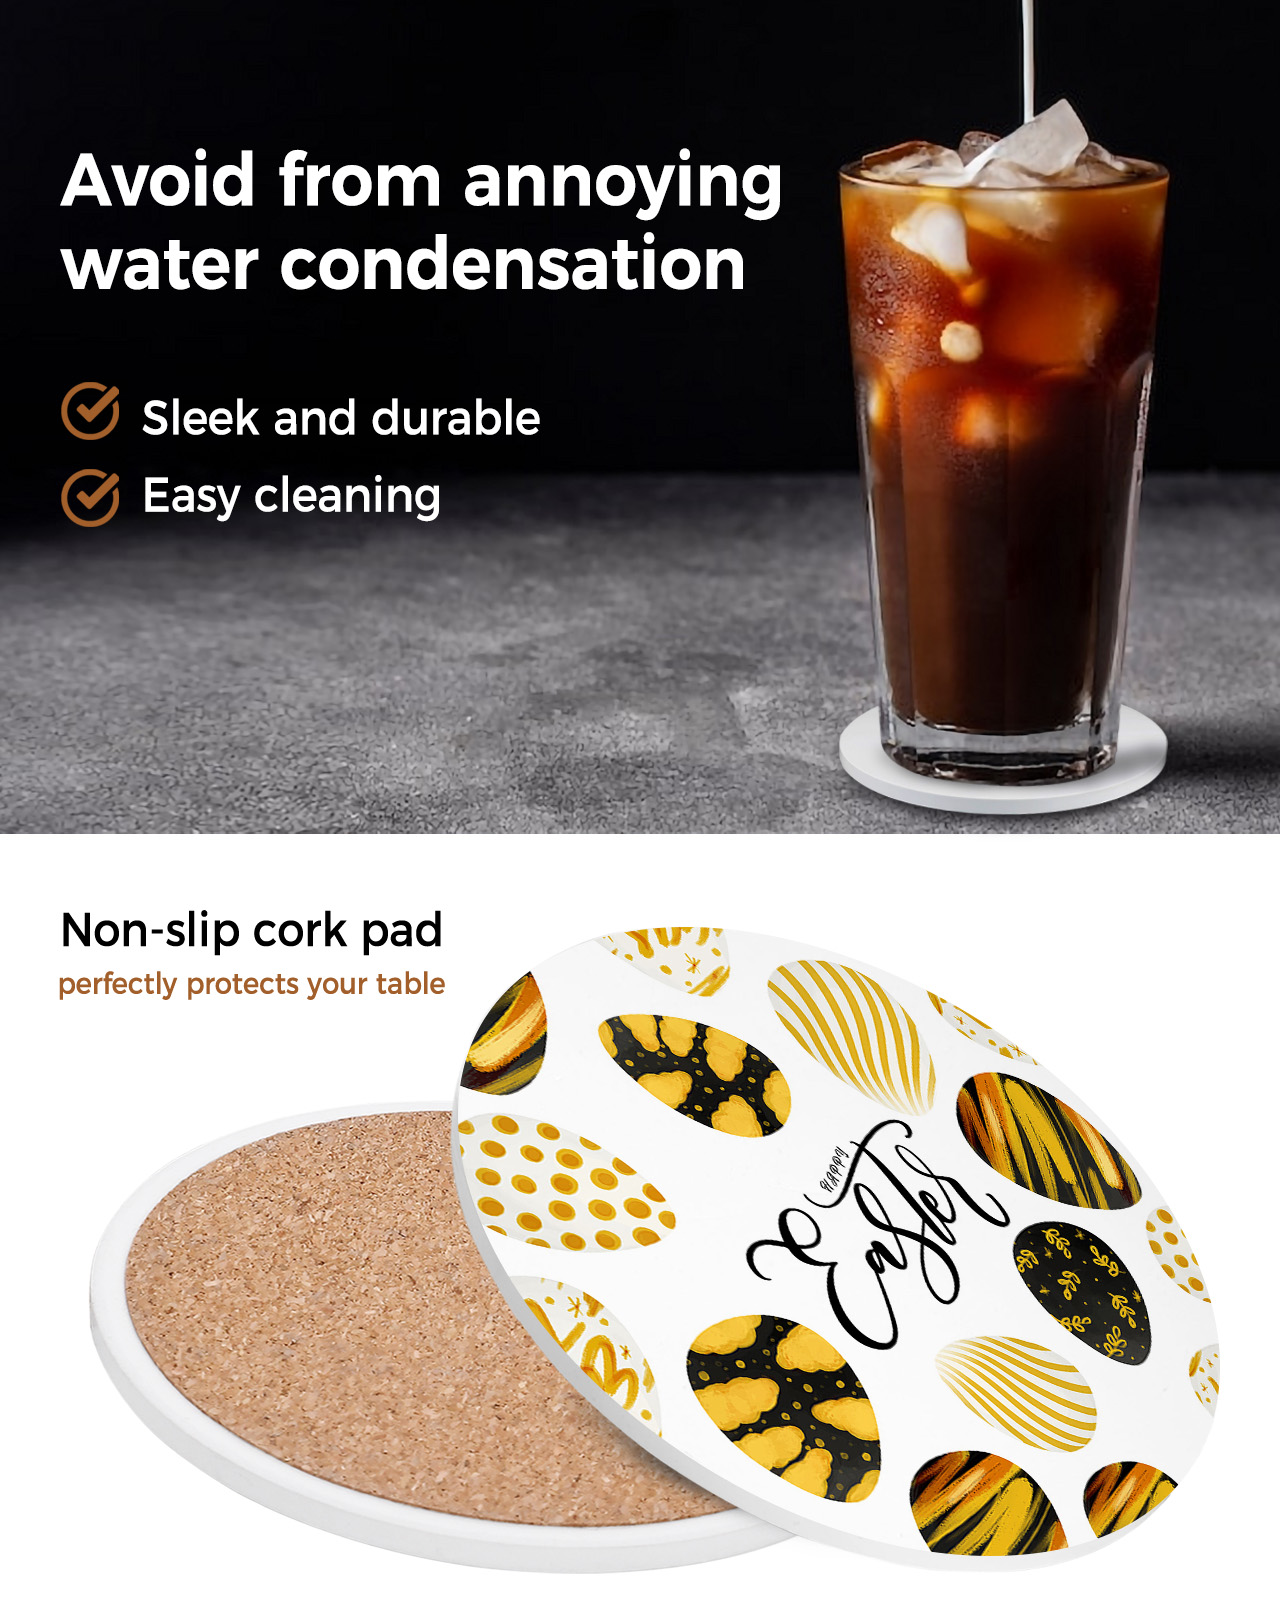 Easter Egg Texture Fashion Round Ceramic Coaster Coffee Tea Cup Mats Non-slip Placemat Tableware Pads Decorations